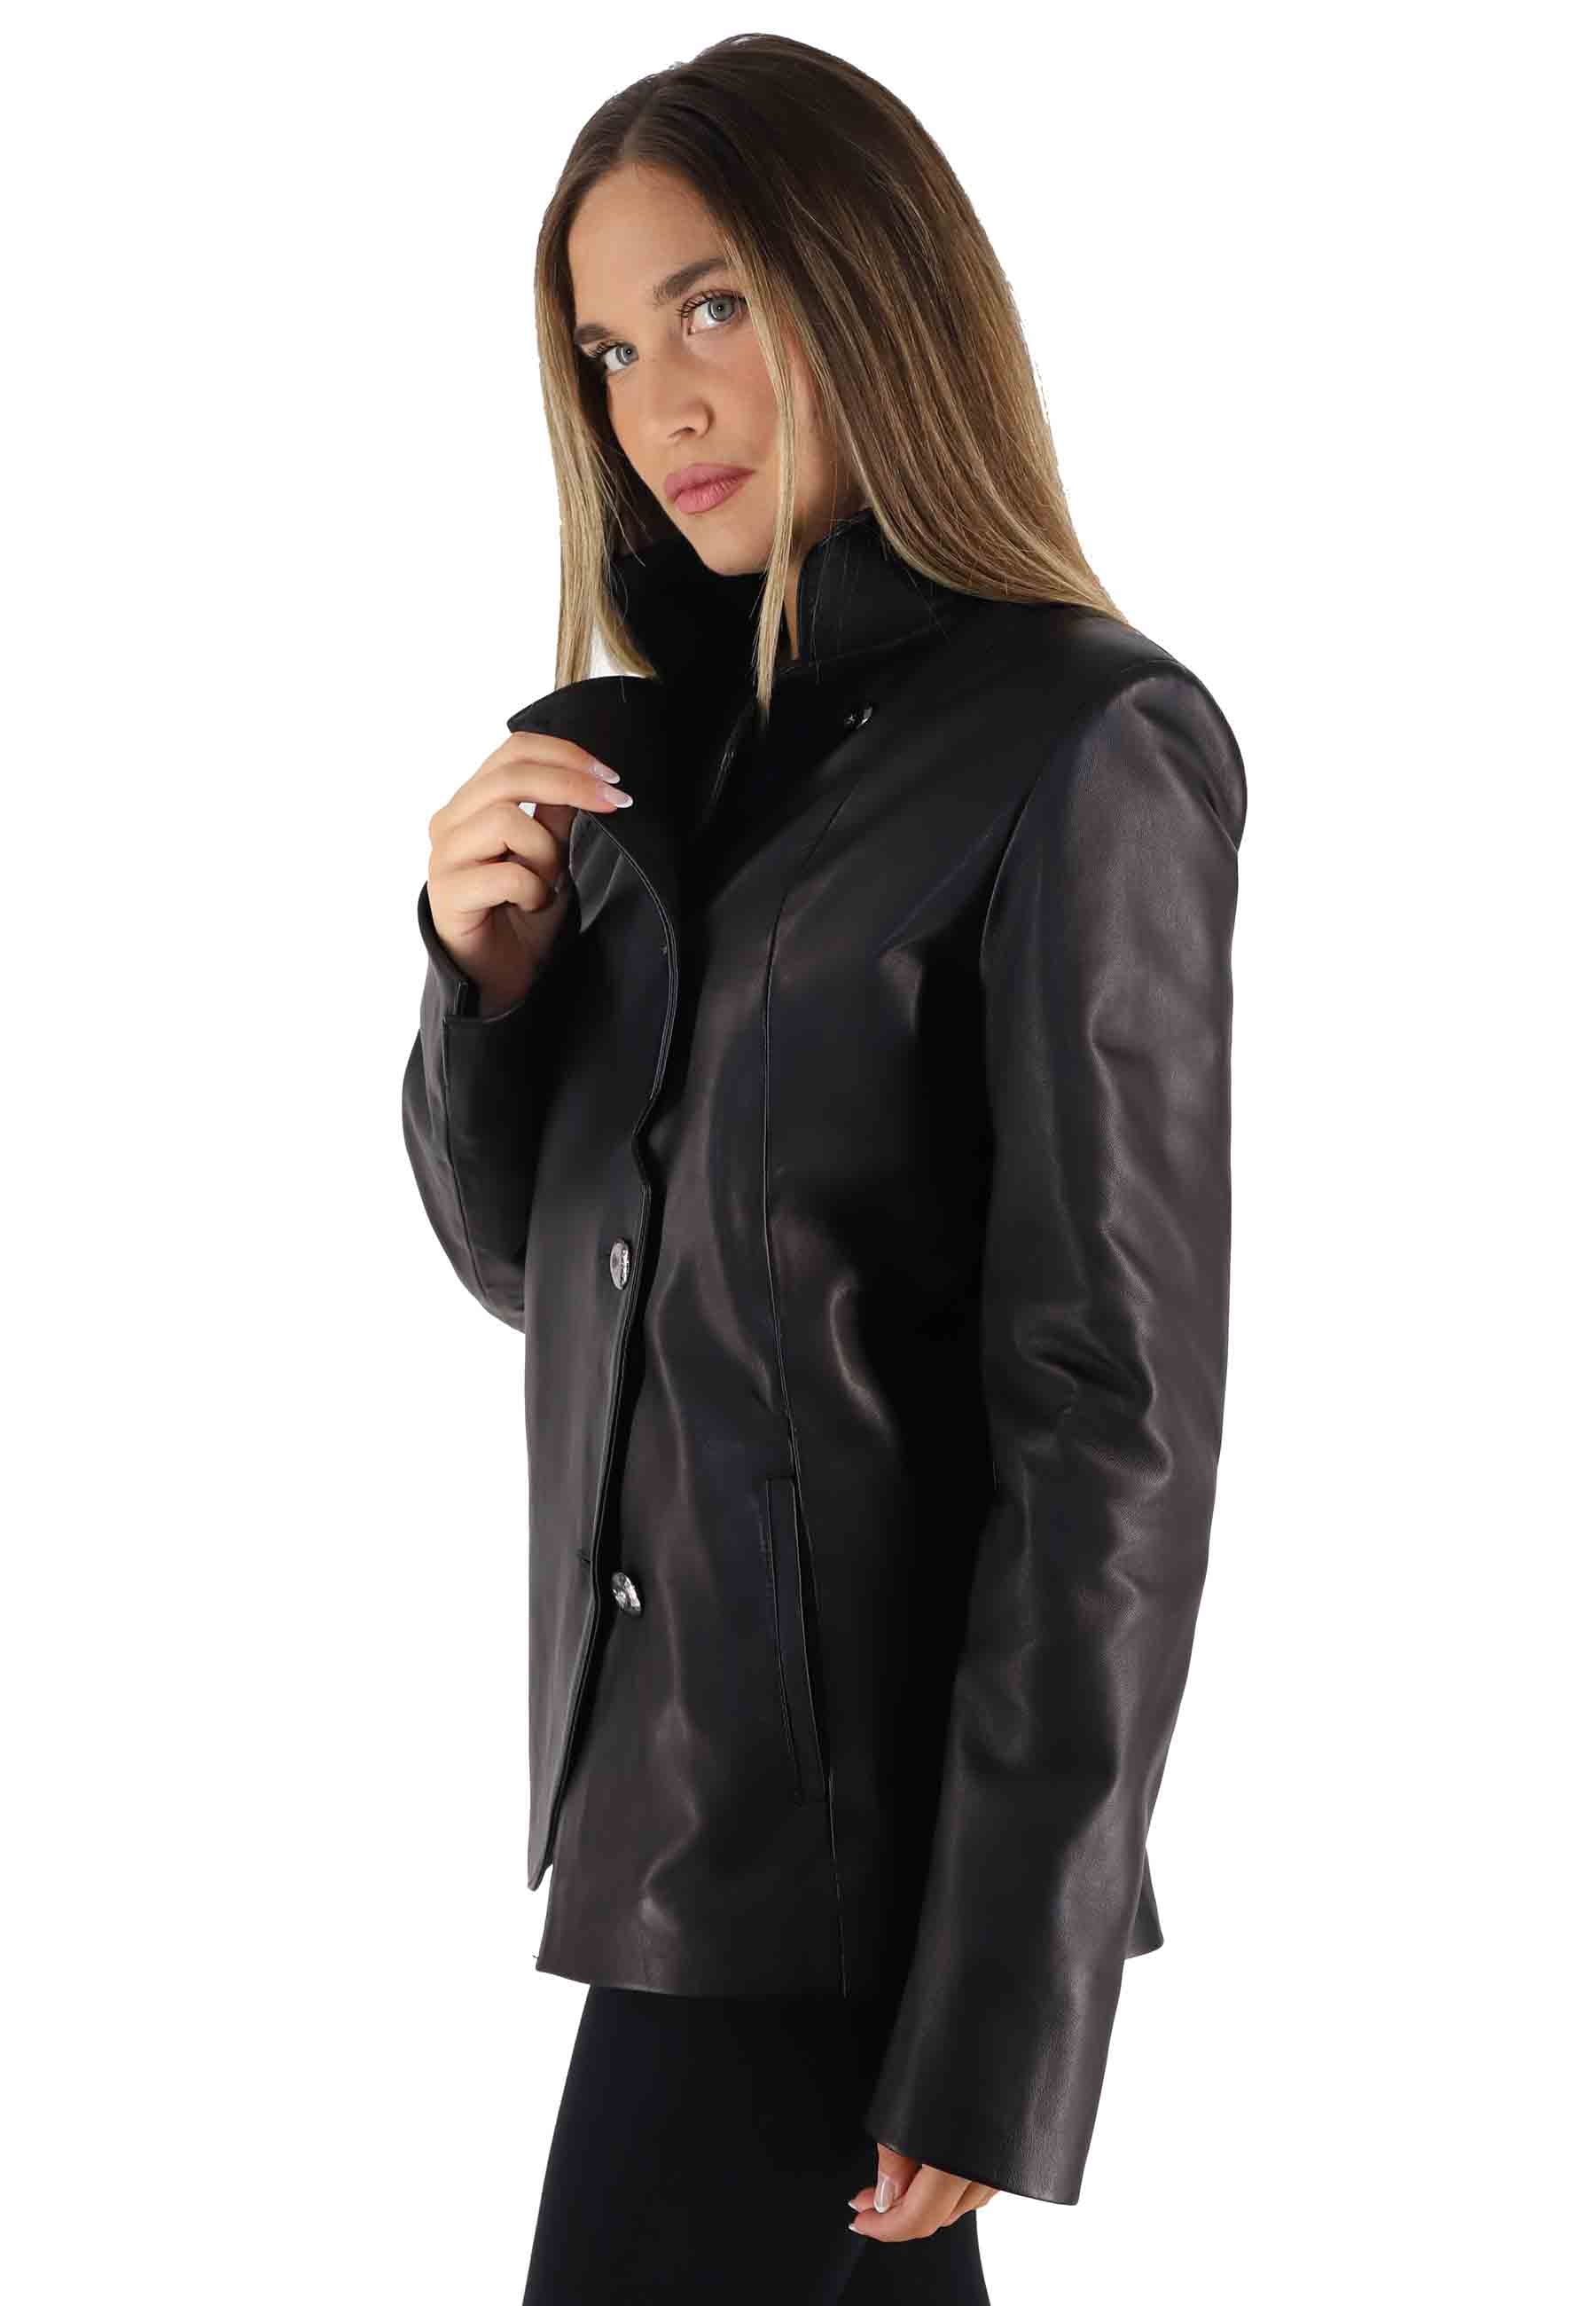 Single-breasted women's black leather jacket with jewel buttons